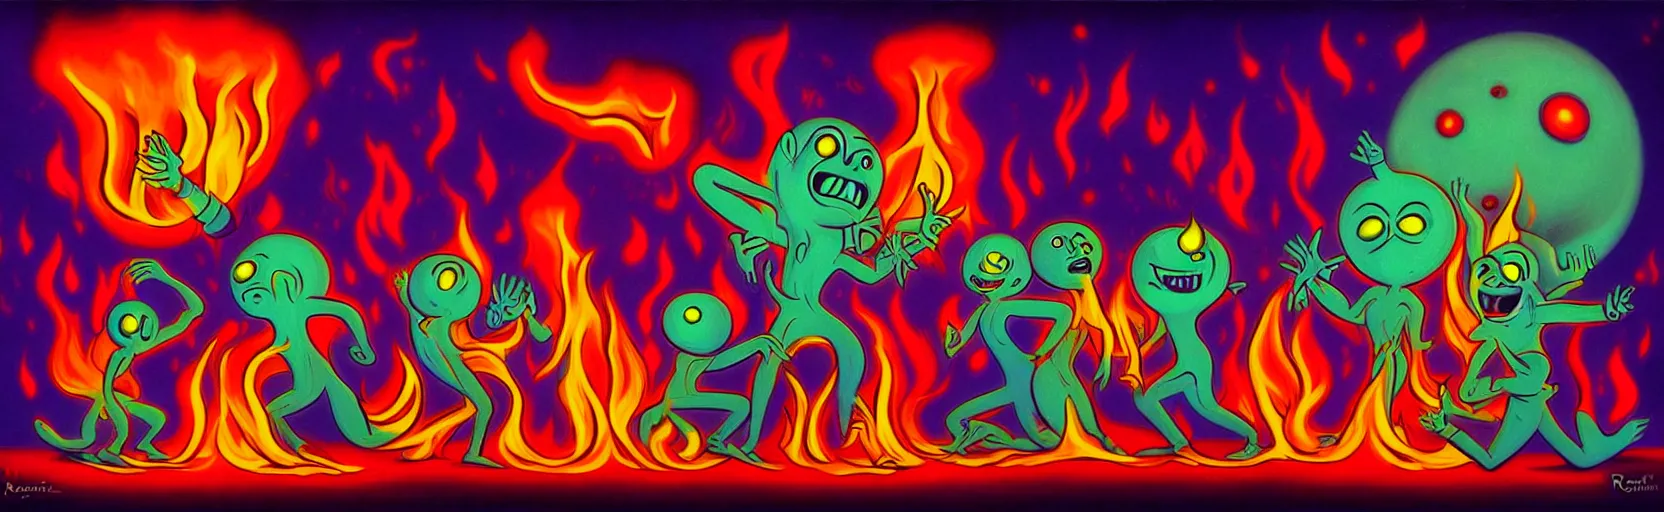 Image similar to uncanny repressed mutants from the depths of a festive imaginal realm in the collective unconscious, dramatic fire glow lighting, surreal dark 1 9 3 0 s fleischer cartoon characters, surreal painting by ronny khalil